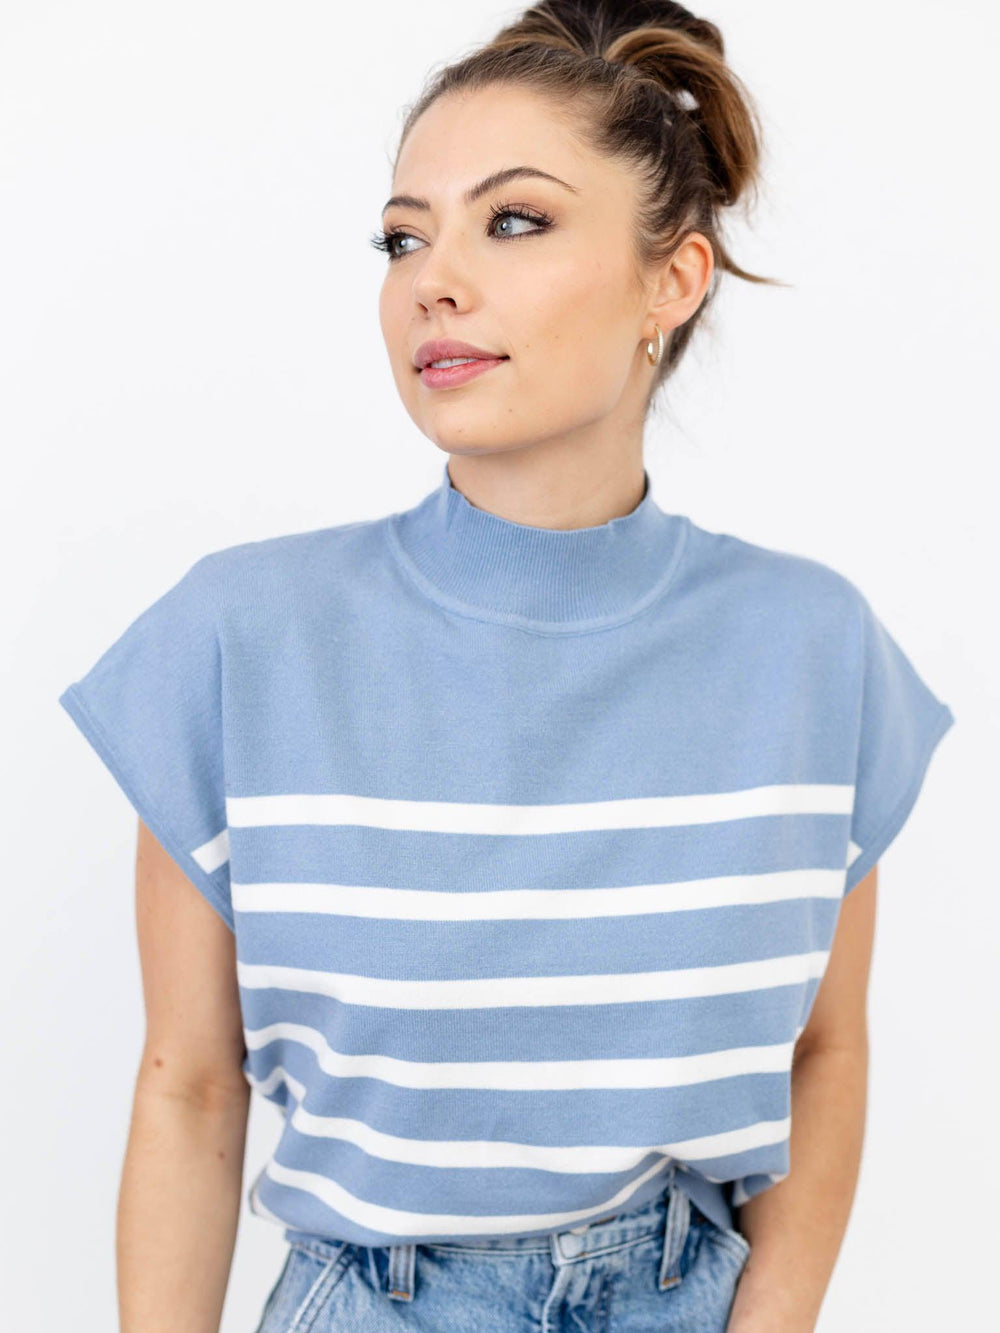 eesome-Short Sleeve Striped Top - Leela and Lavender